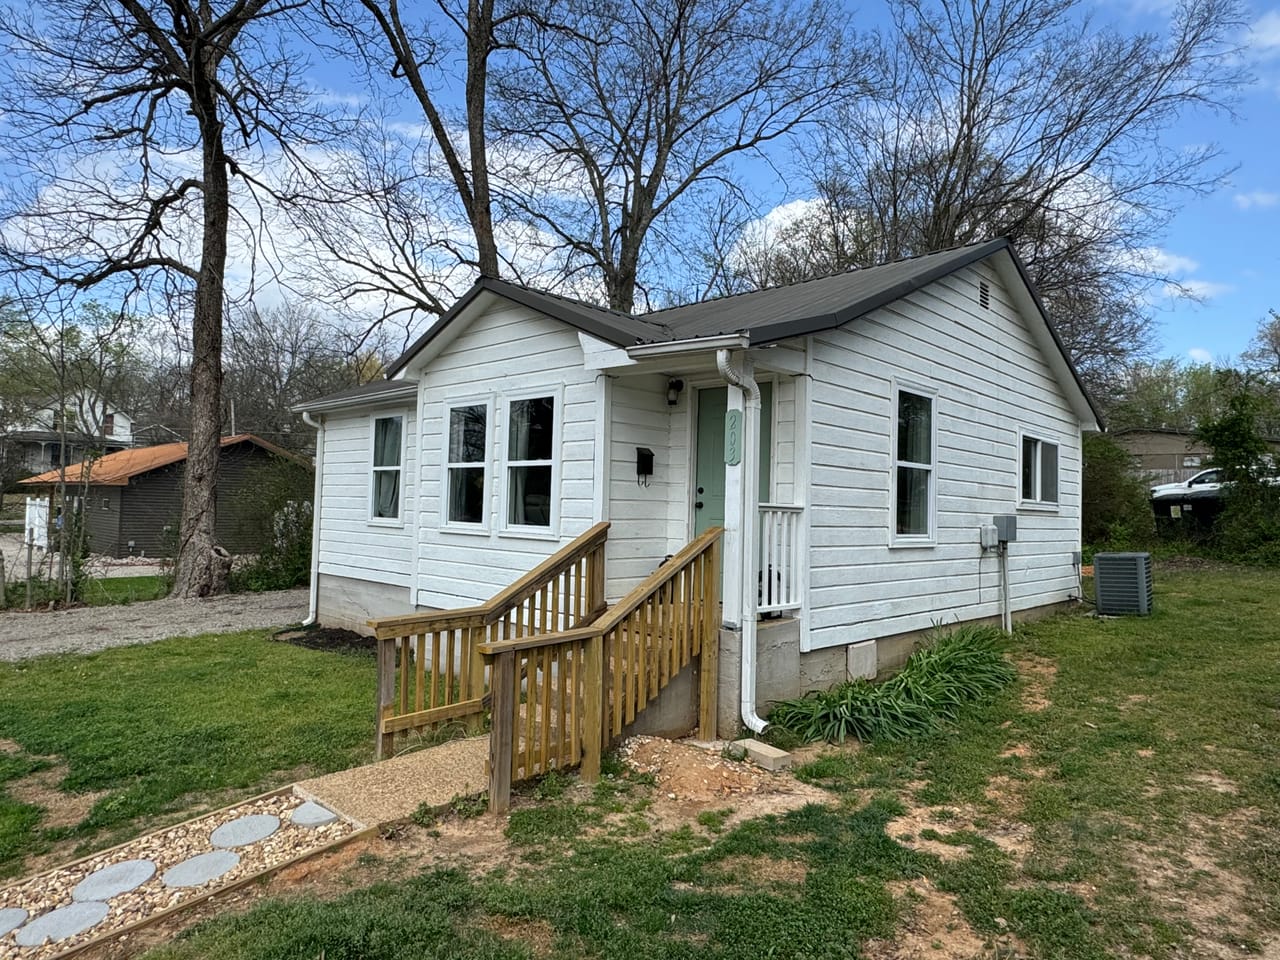 2 Bed, 1 Bath Home For Sale in Doniphan, MO